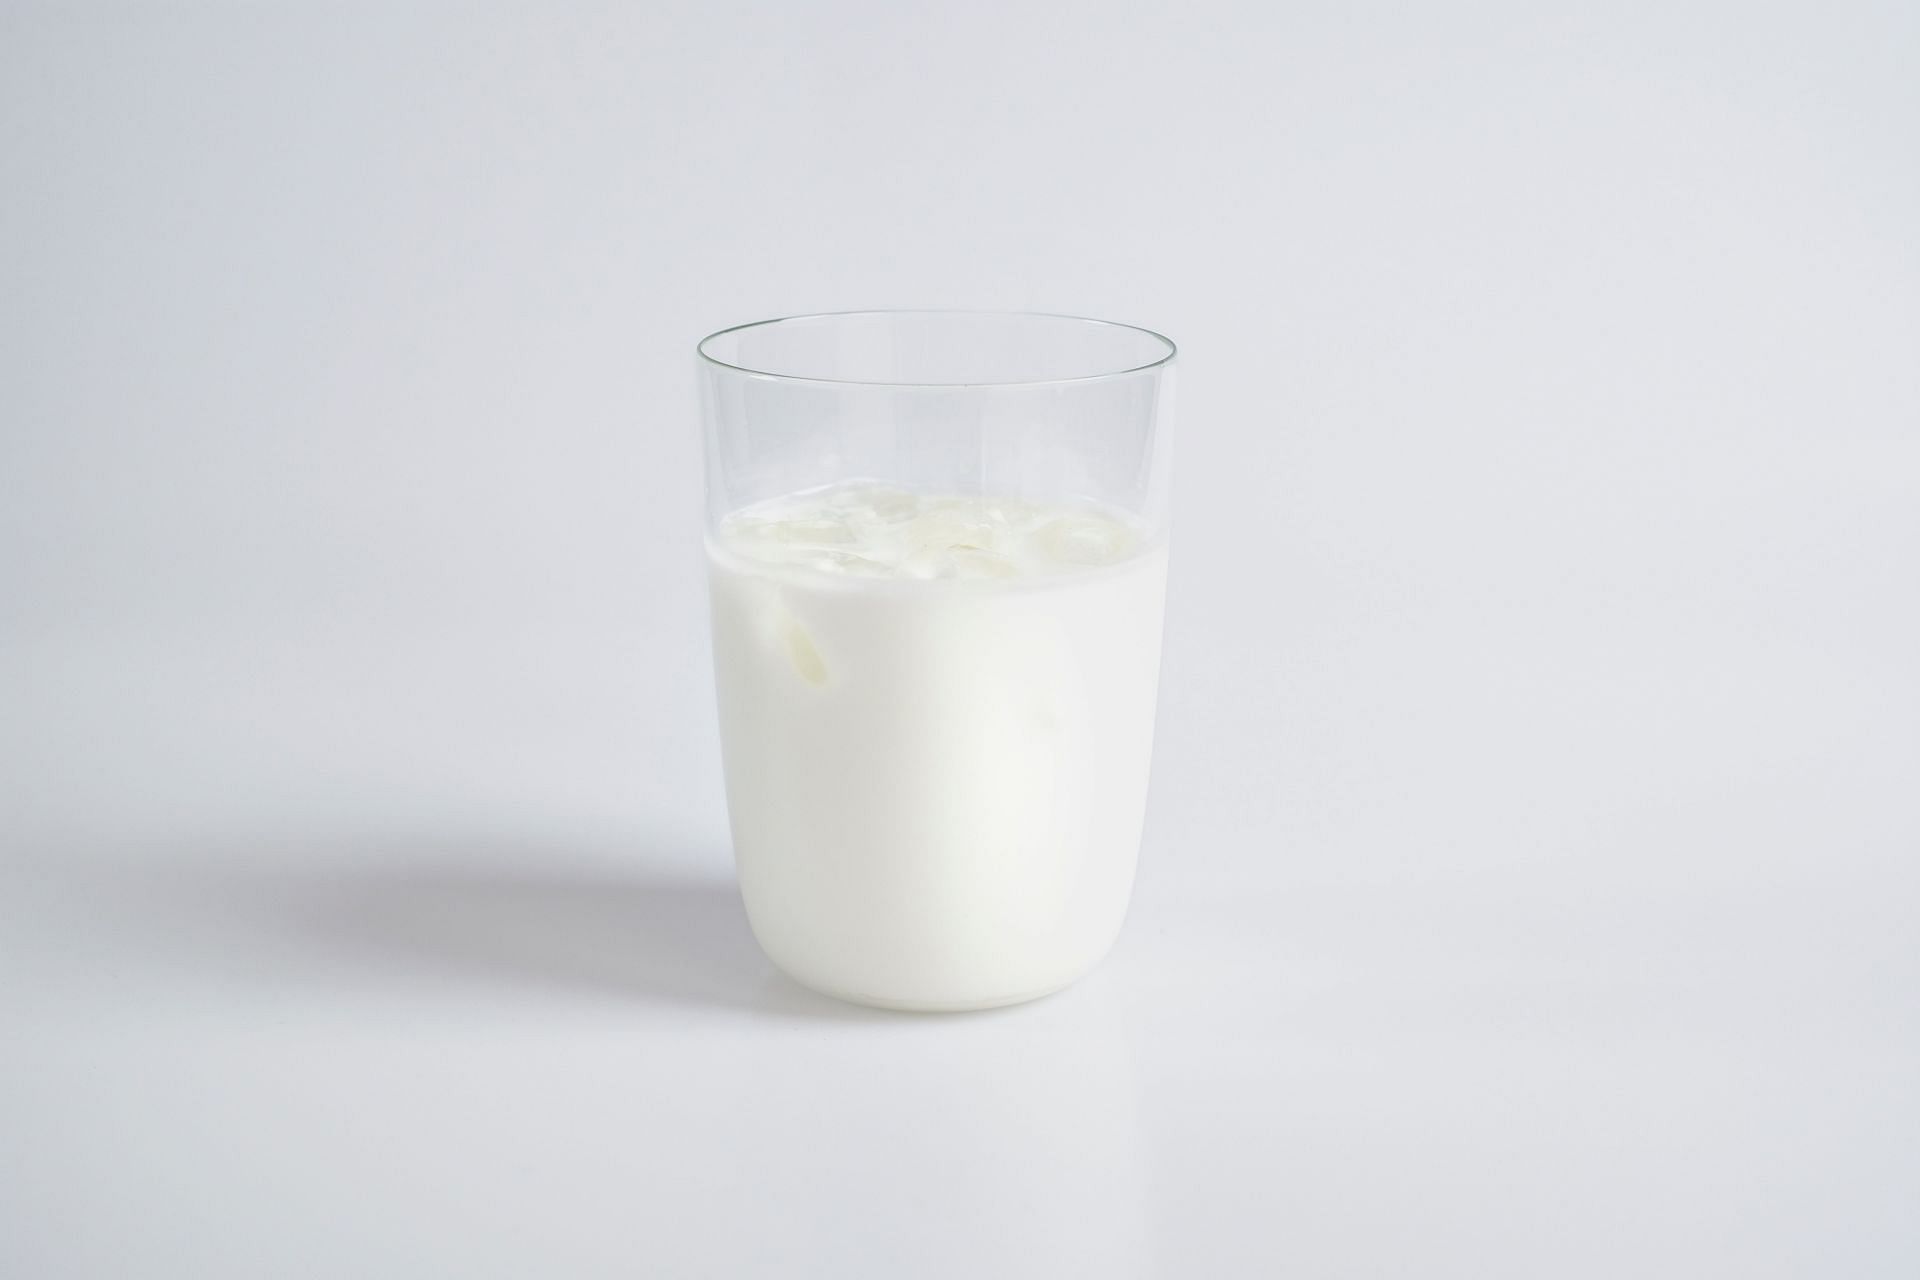 Milk in Faked foods in the world (Image via Unsplash/An Vision)